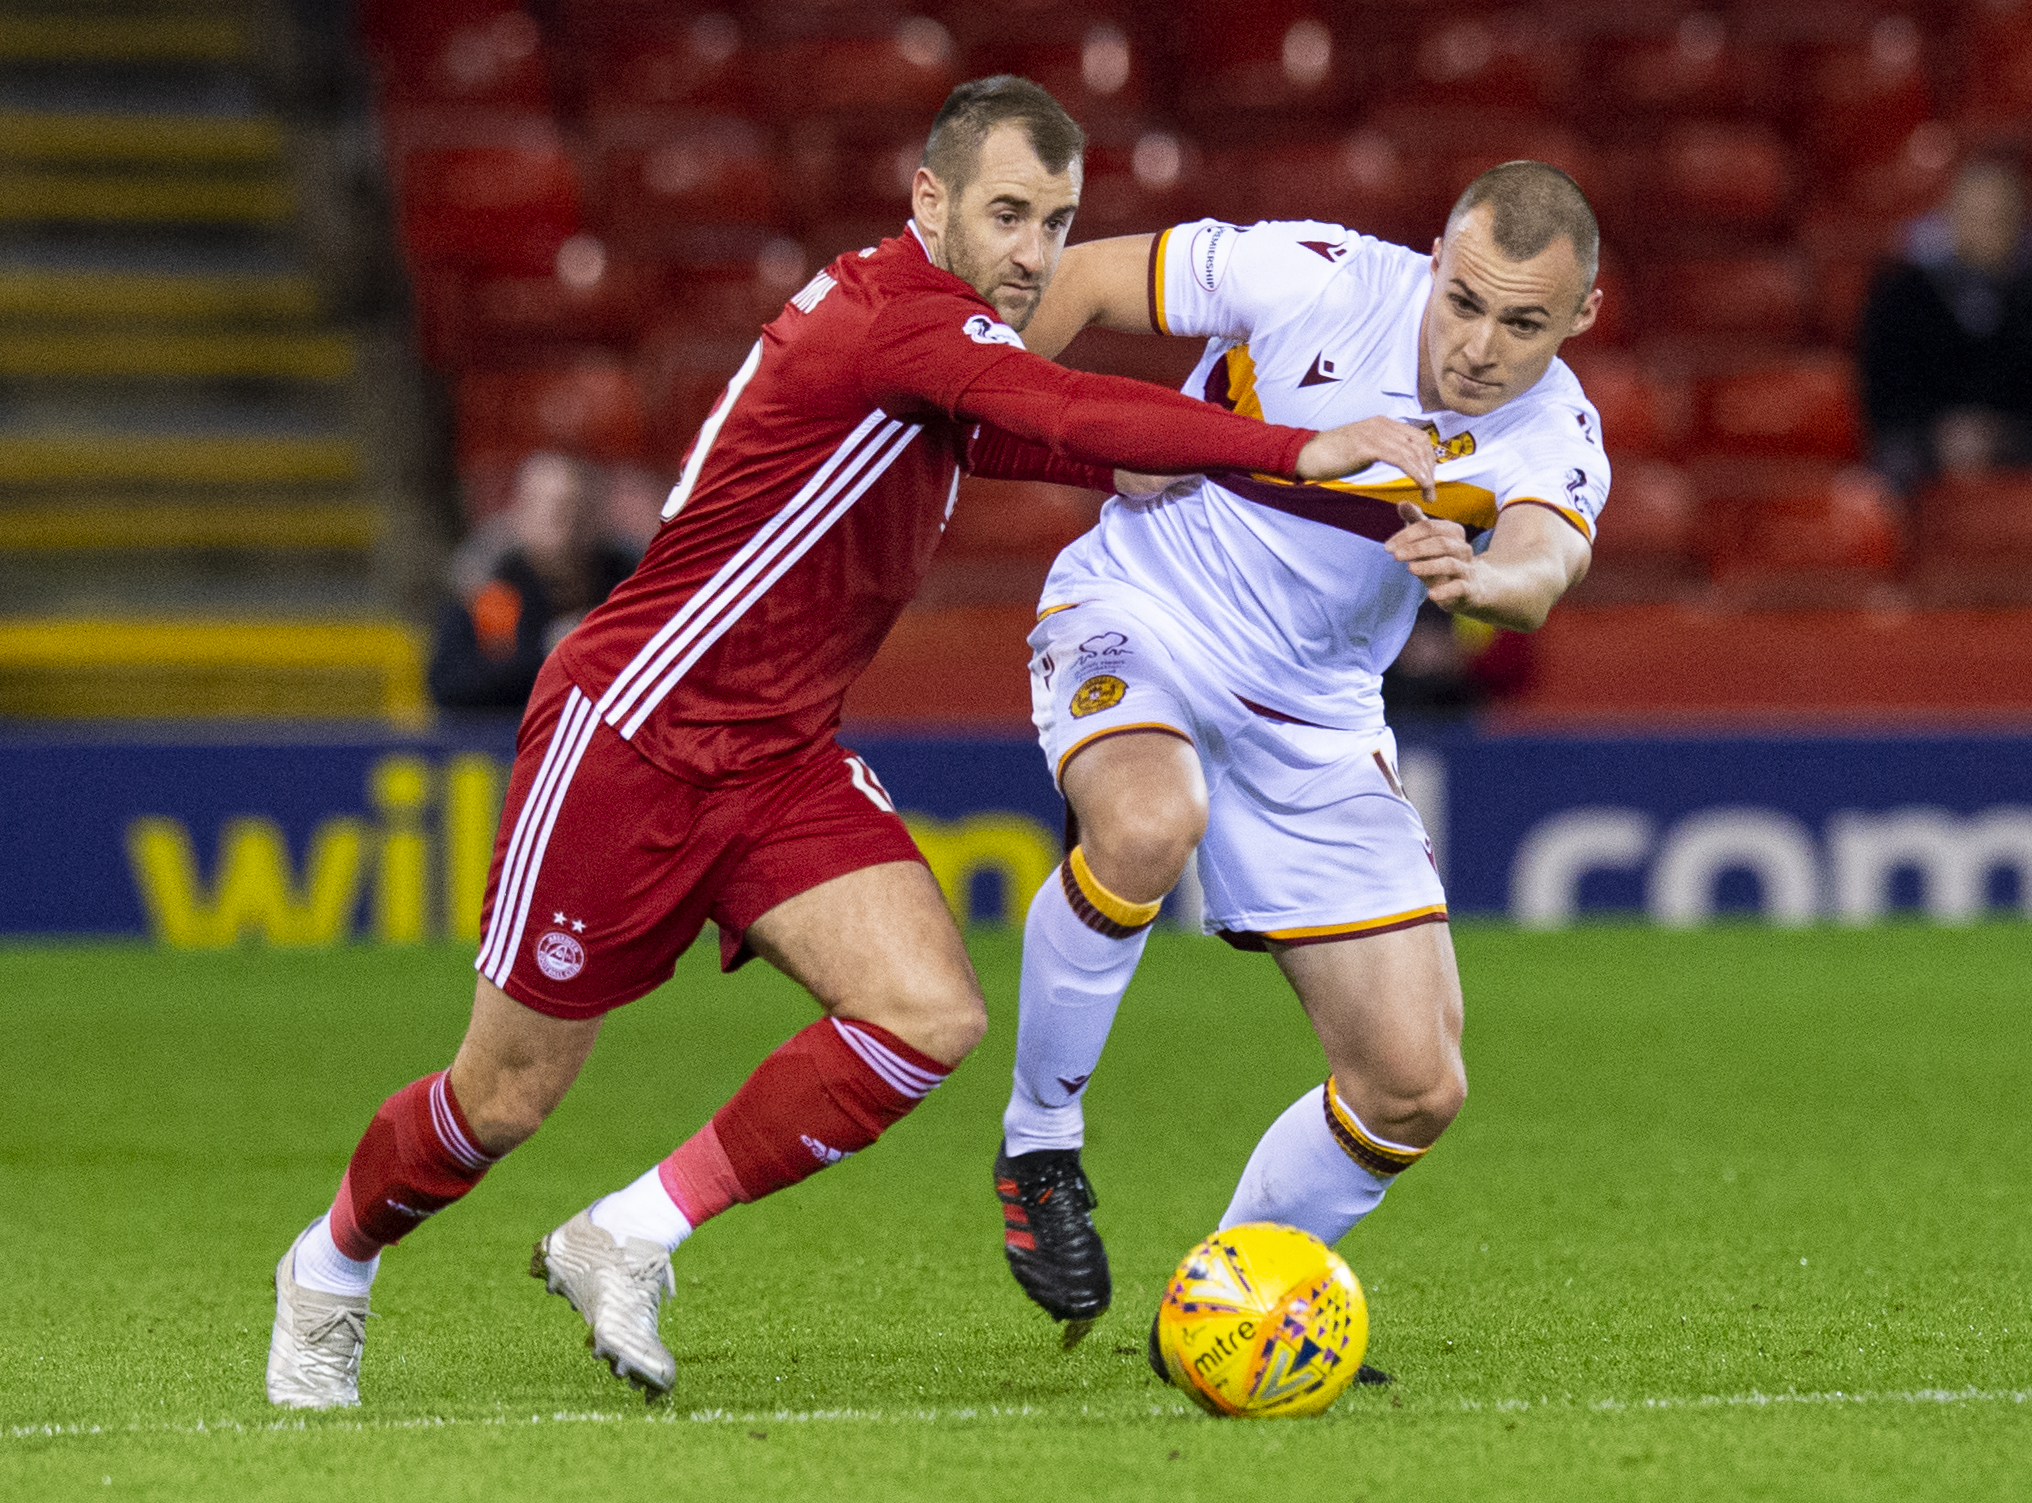 The Dons are in a battle with Motherwell for the Premiership's third spot.